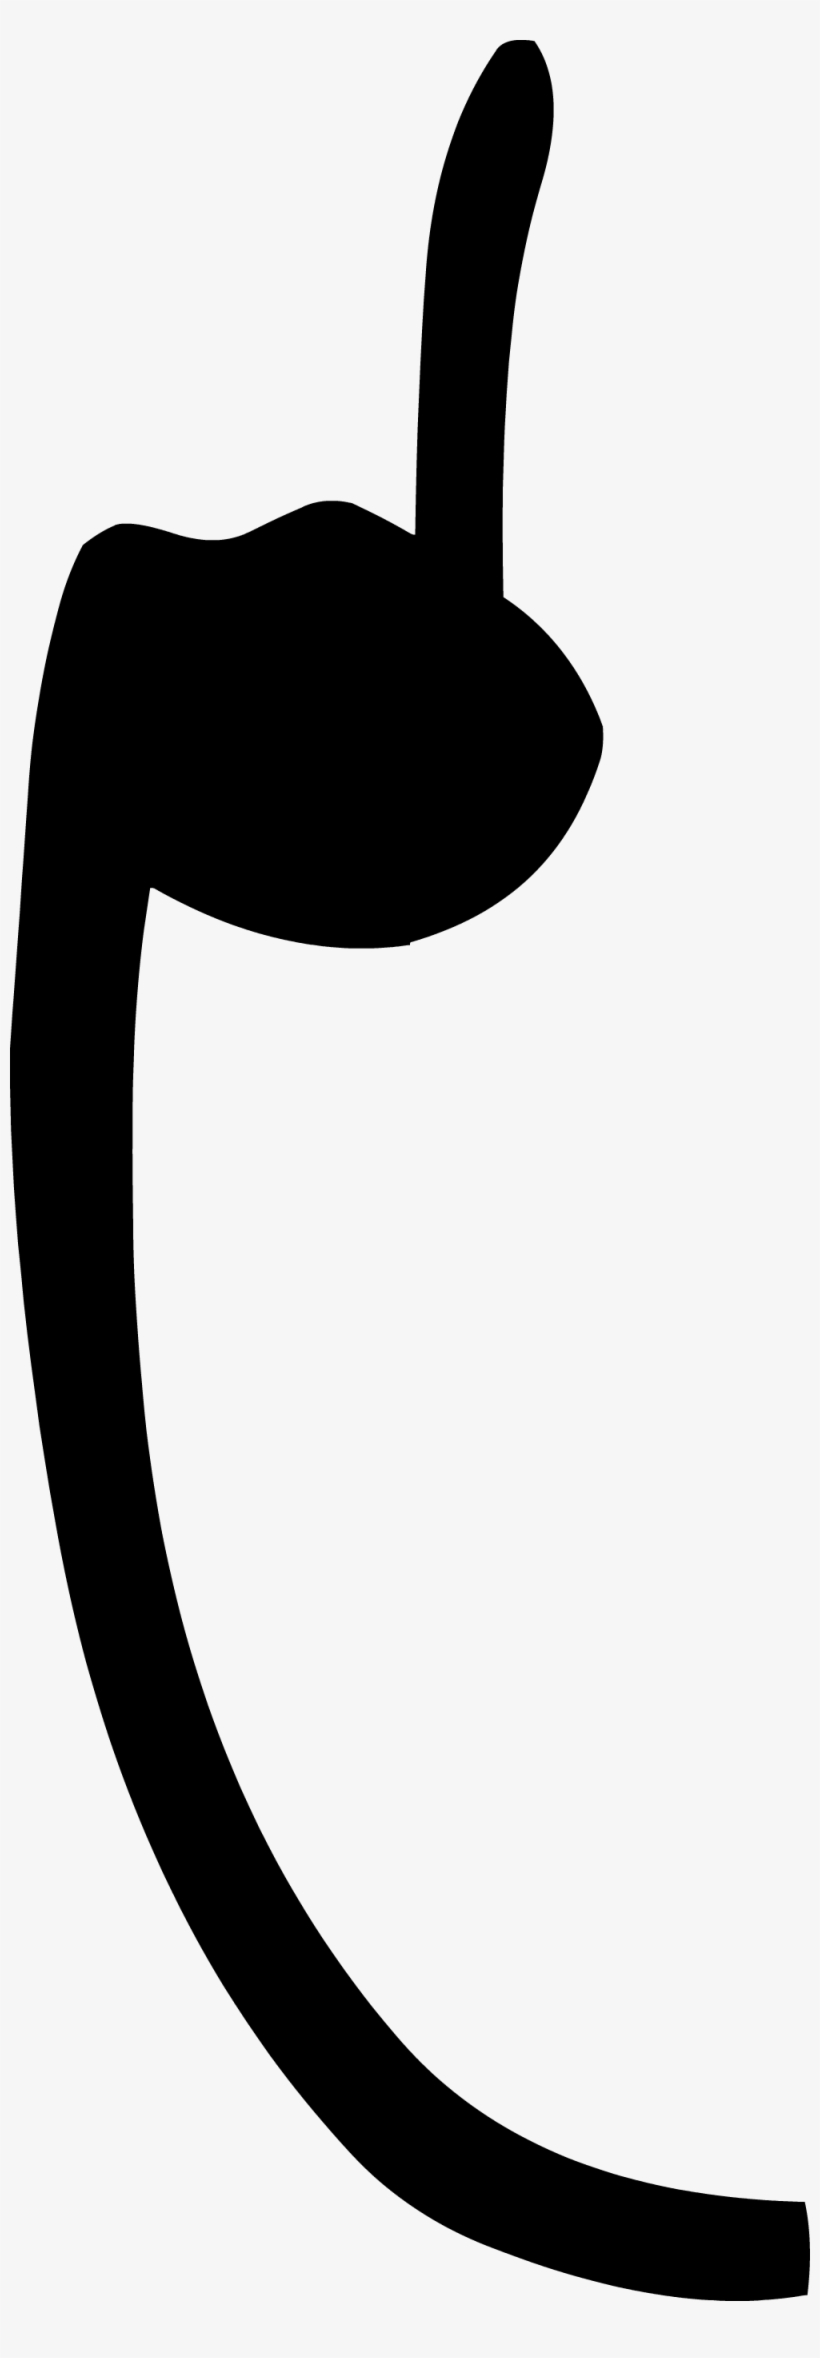 Pointed Arm - Cartoon Pointing Arm Png, transparent png #5197372